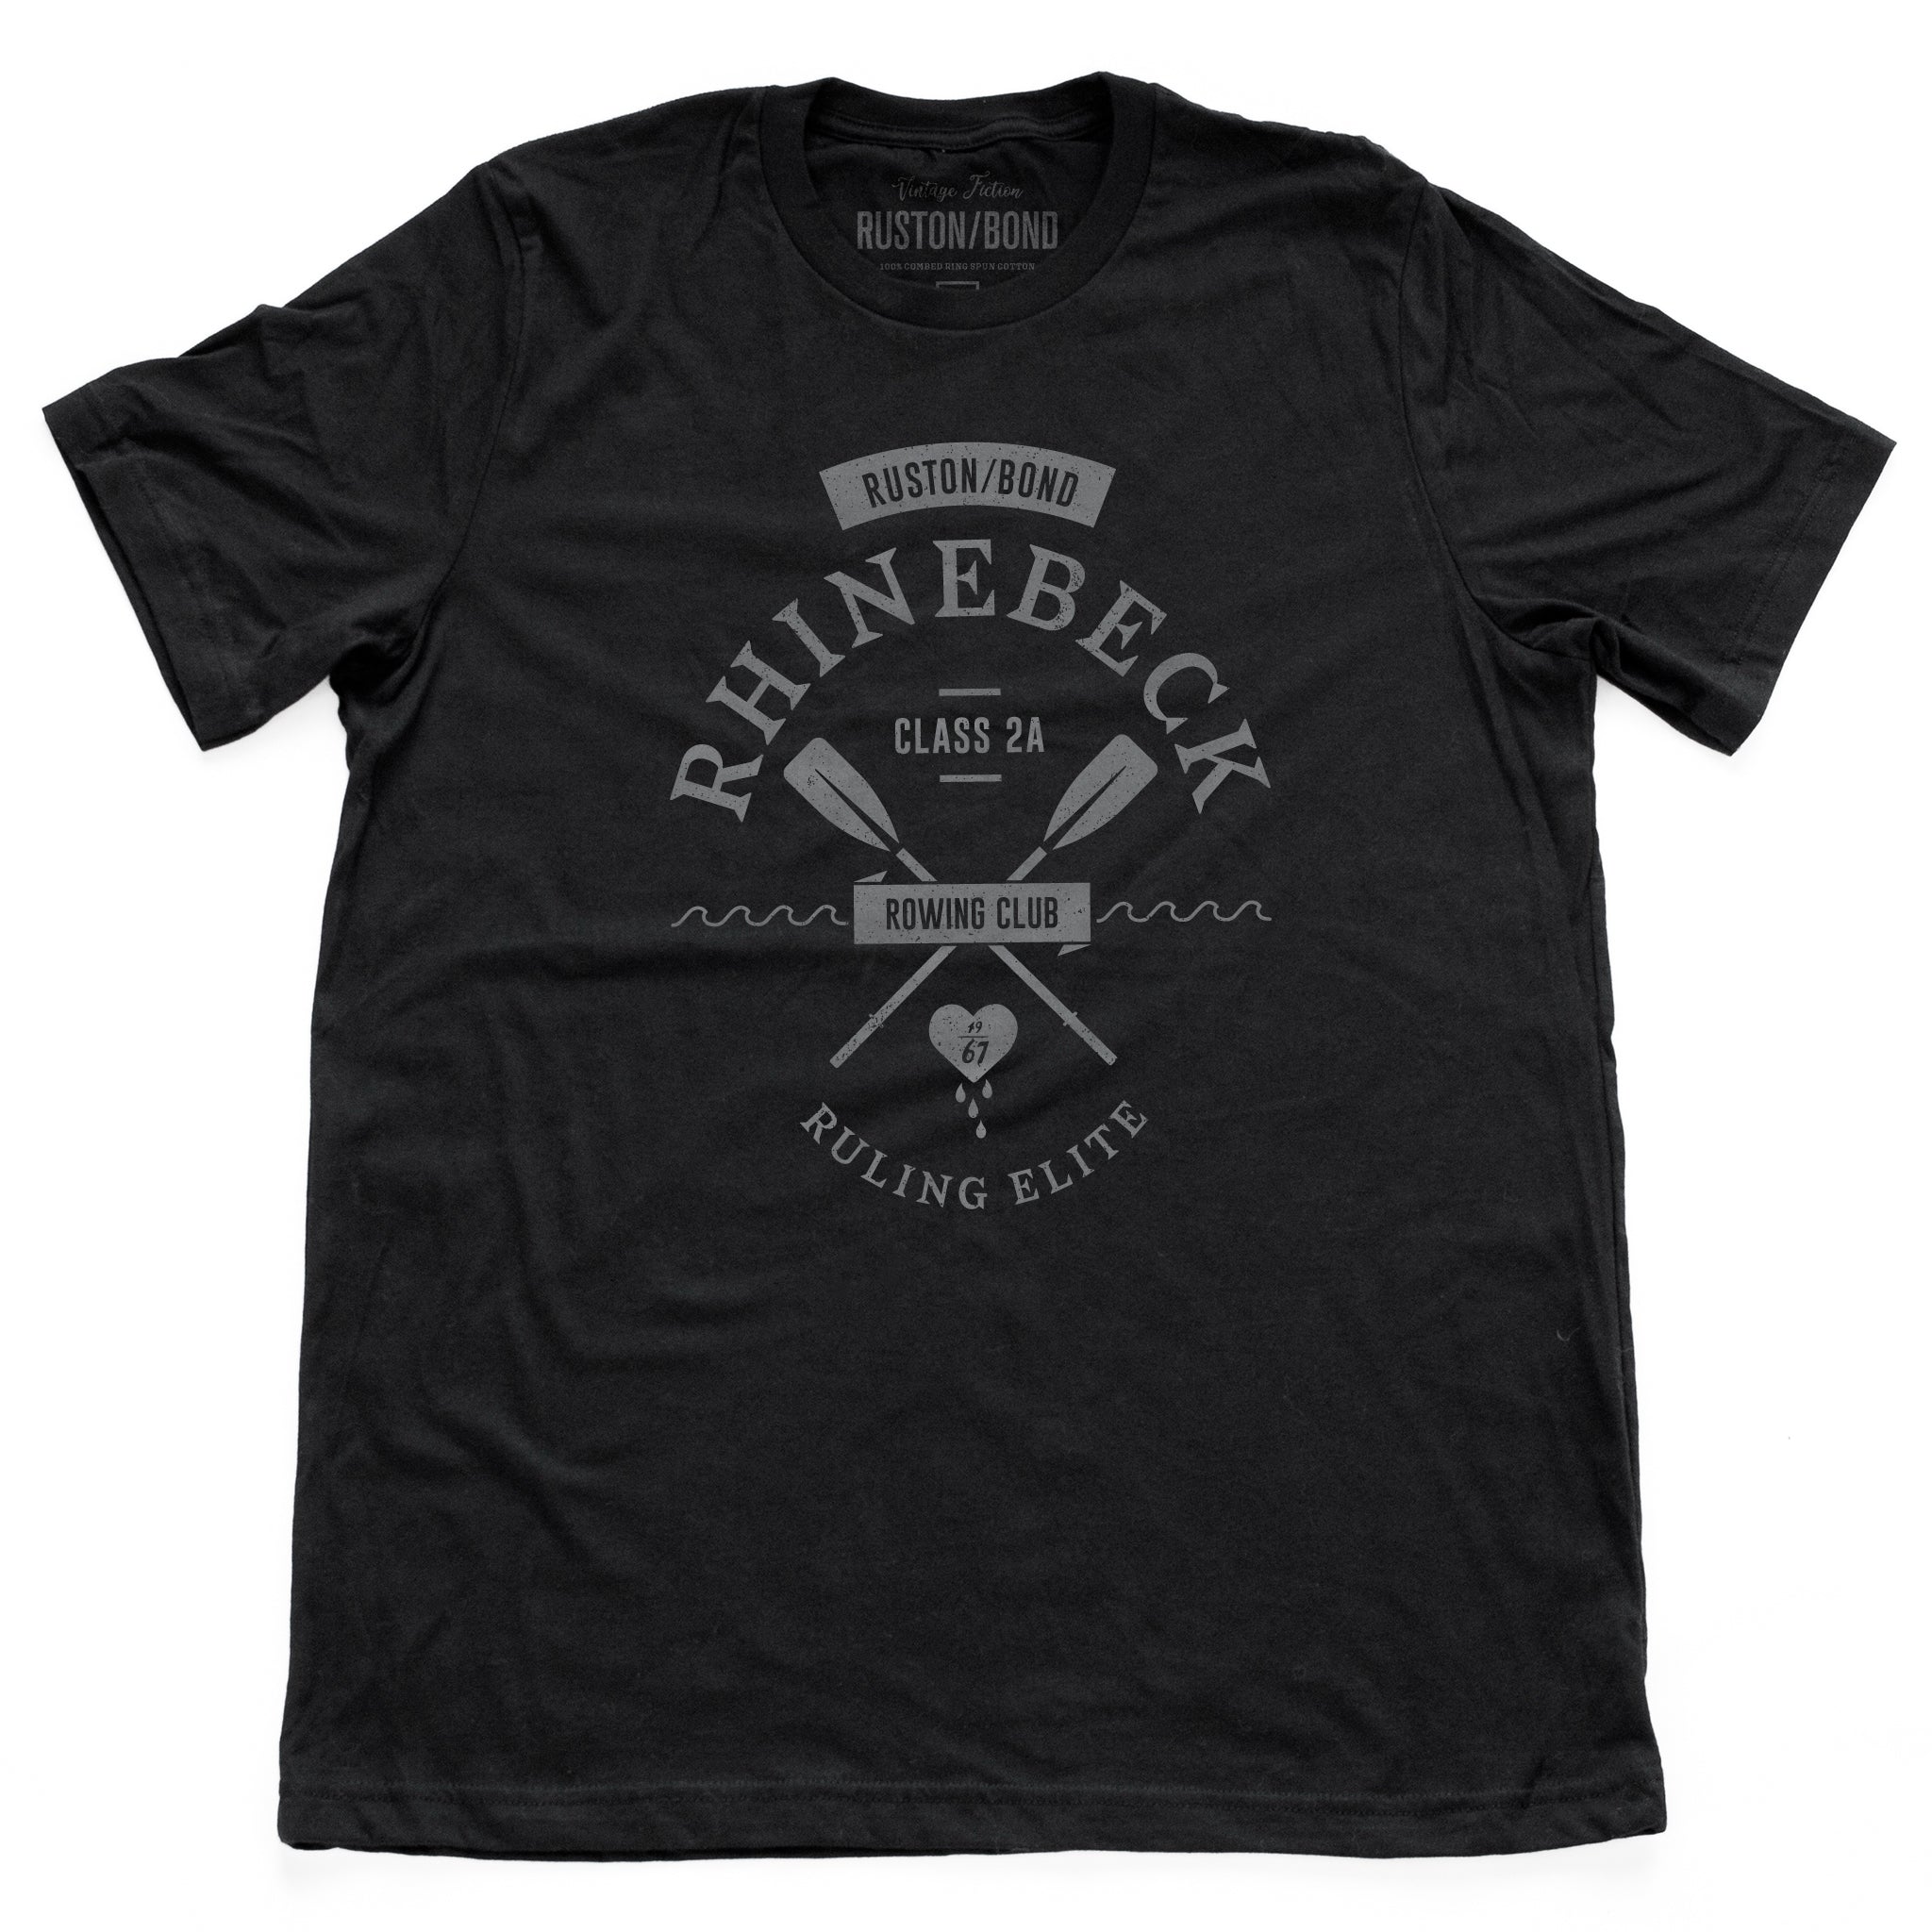 A preppy, vintage-look, retro graphic t-shirt, for a fictional Rhinebeck (New York) rowing club. It depicts two oars over waves, and the celebratory words “ruling elite” below a heart. In classic Black, by fashion brand Ruston/Bond, for a wolfsaint.net